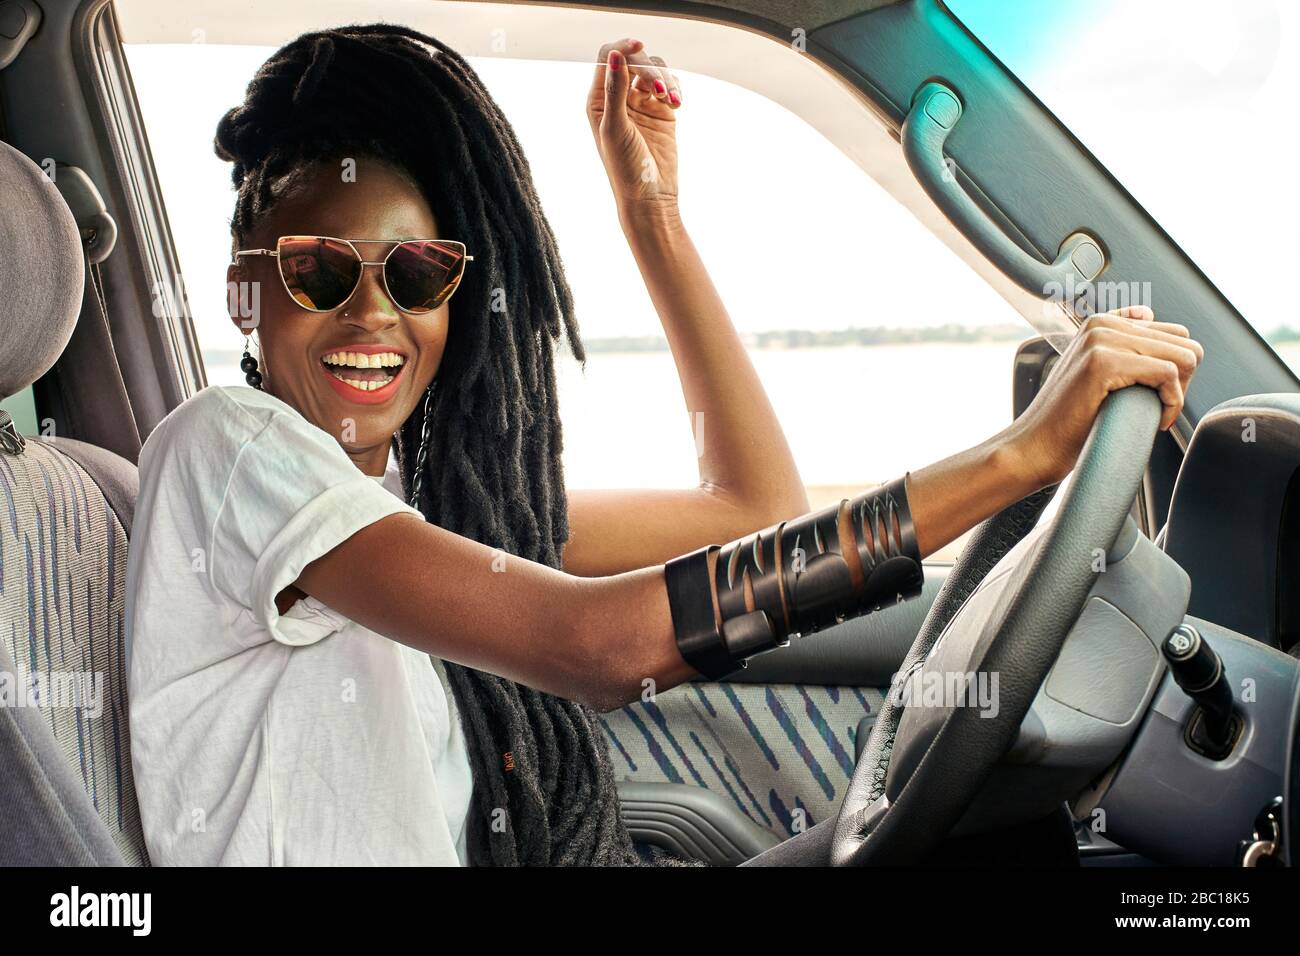 Portrait of laughing woman with dreadlocks driving car Stock Photo